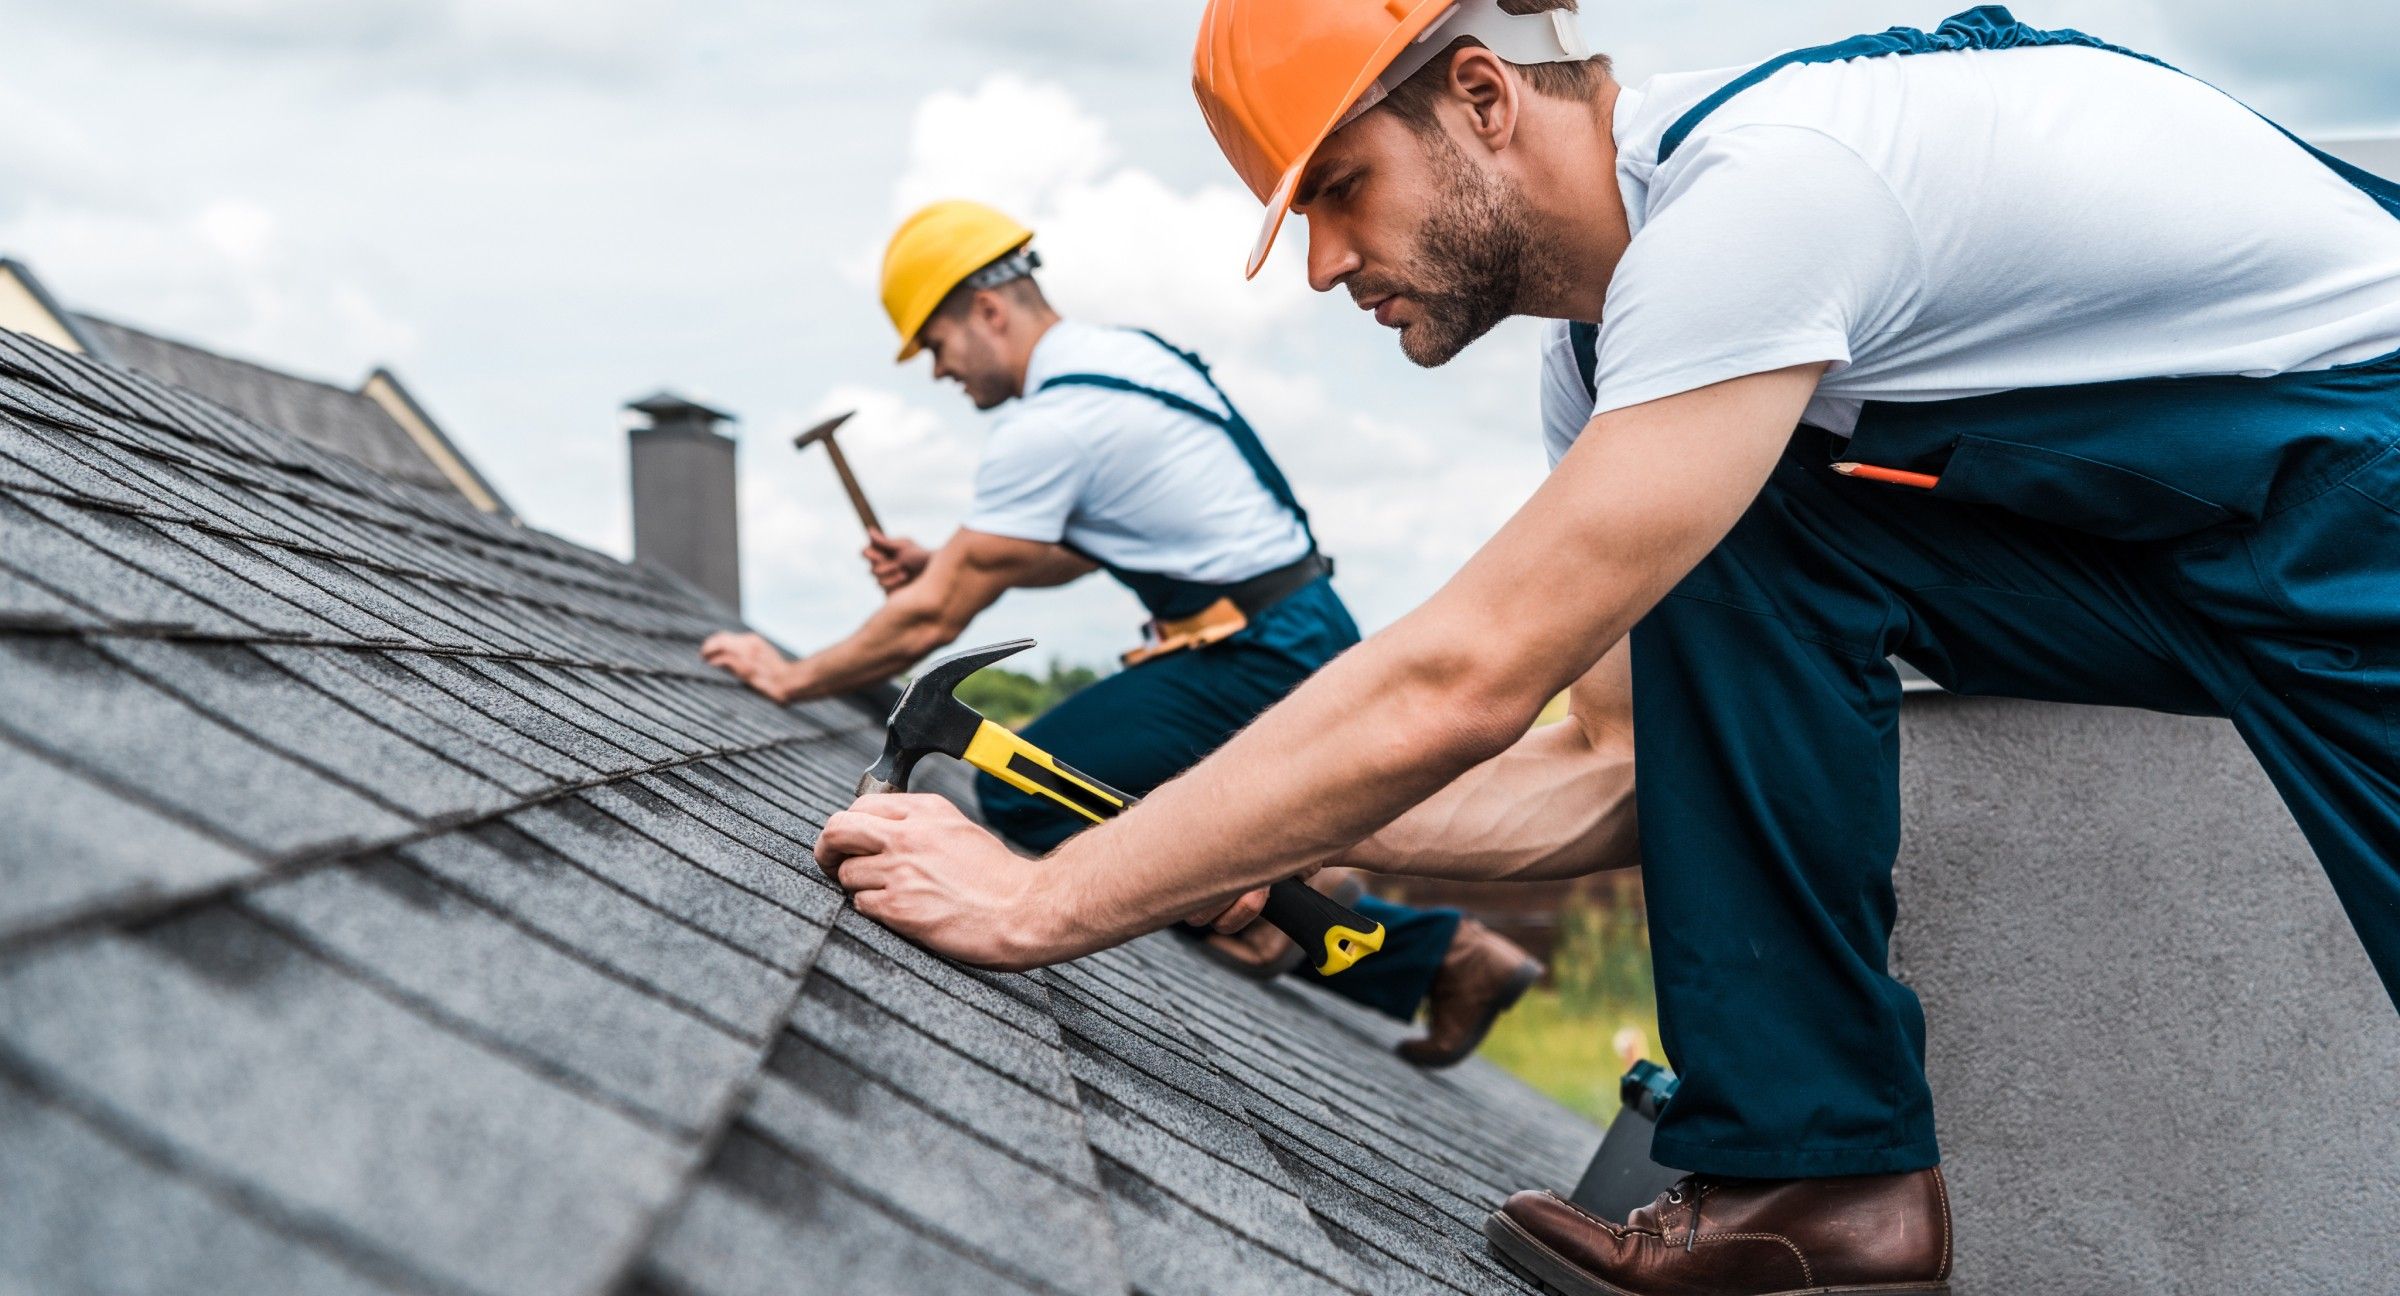 Featured image for “Are Roof Repairs Tax Deductible?”